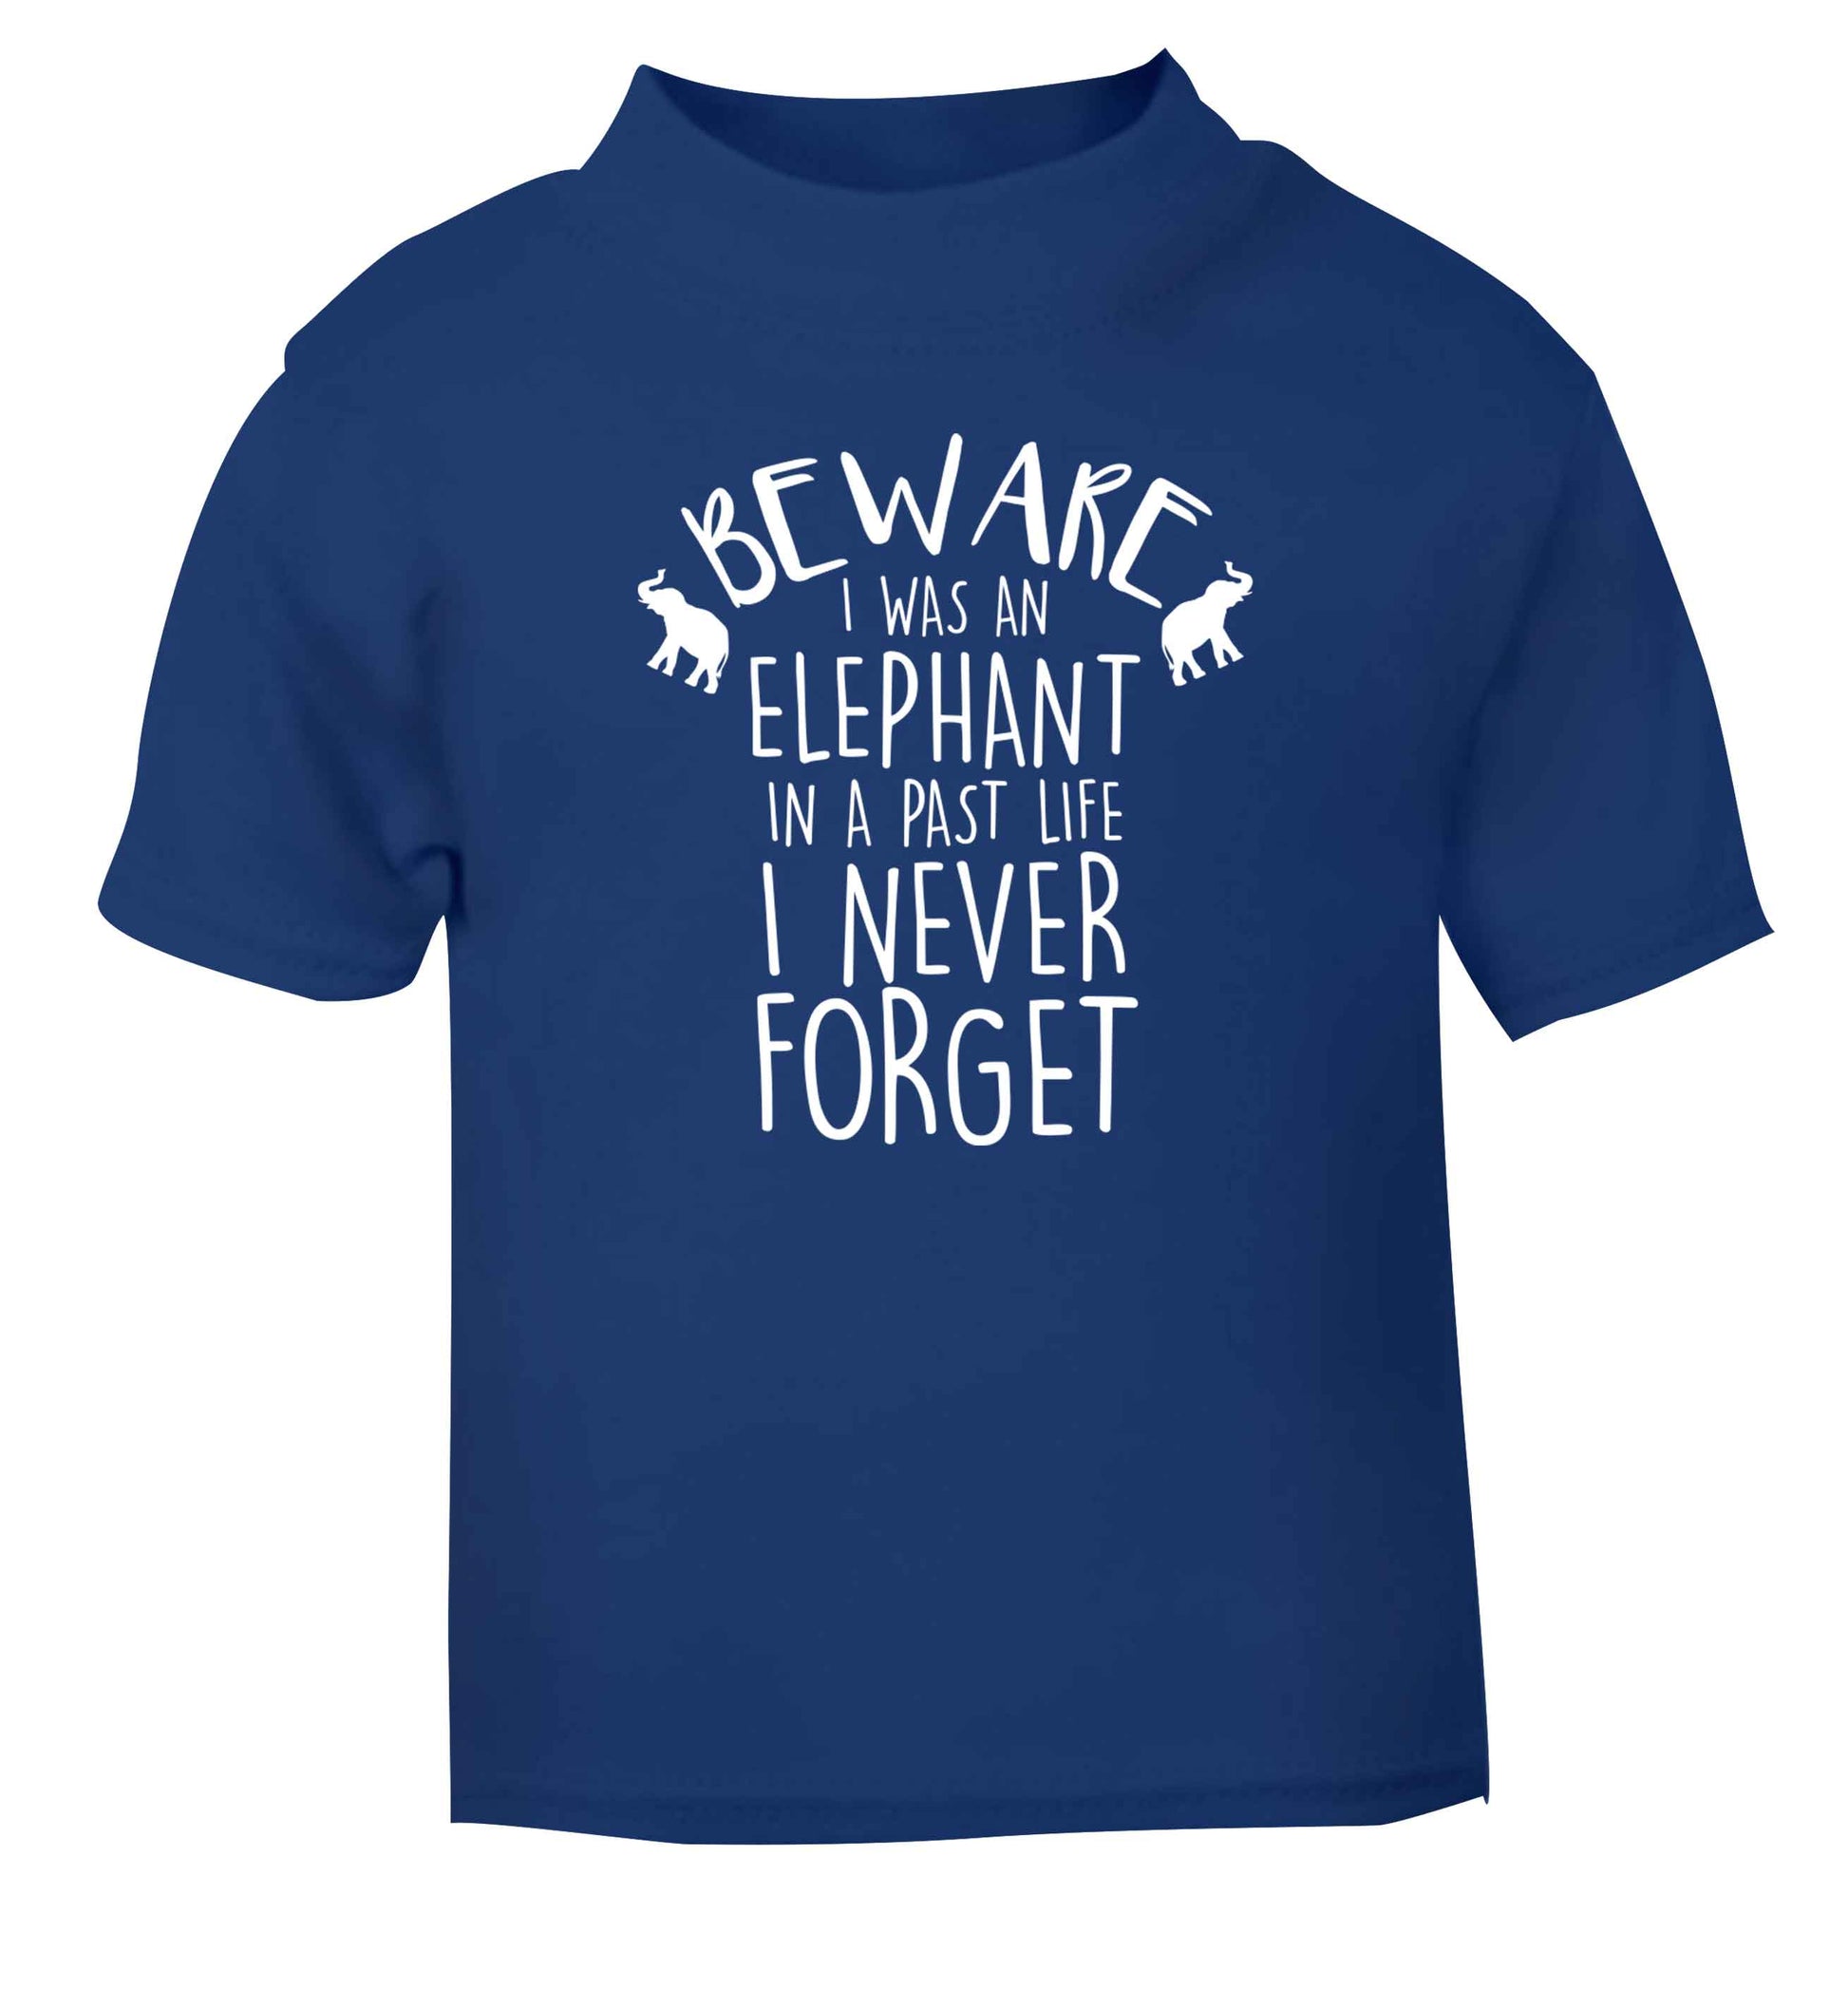 Beware I was an elephant in my past life I never forget blue Baby Toddler Tshirt 2 Years